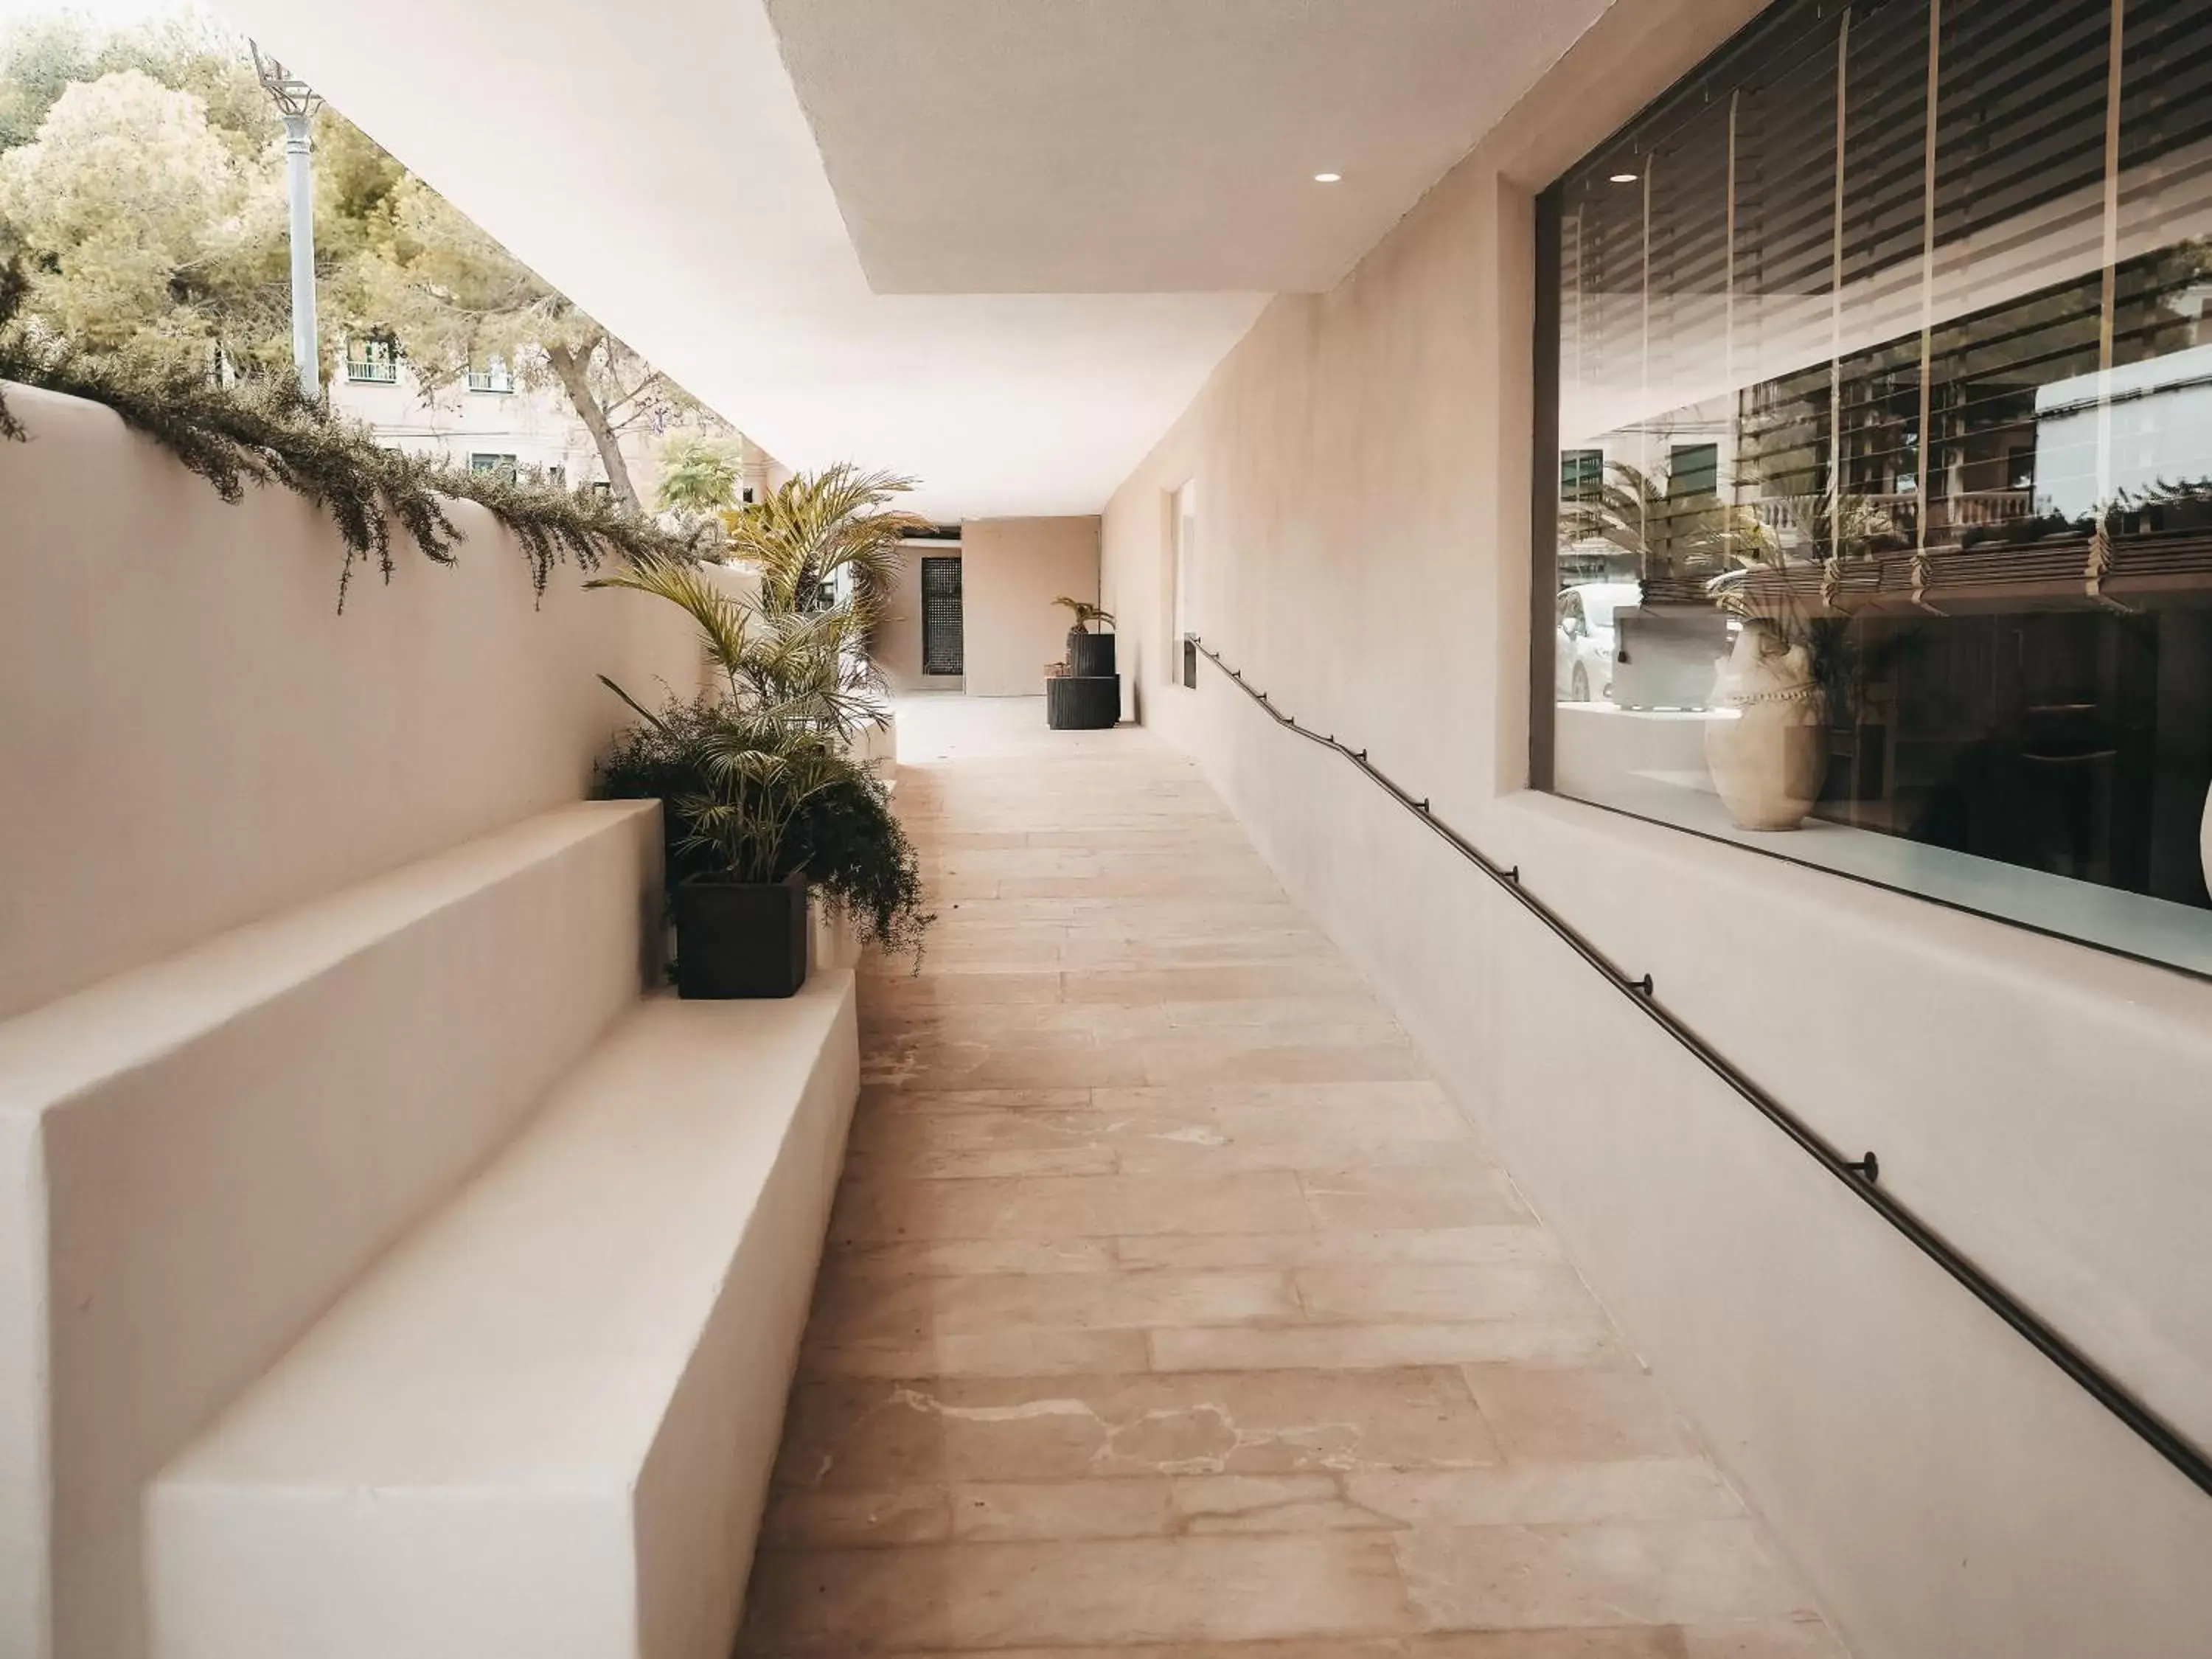 Property building in Barefoot Hotel Mallorca